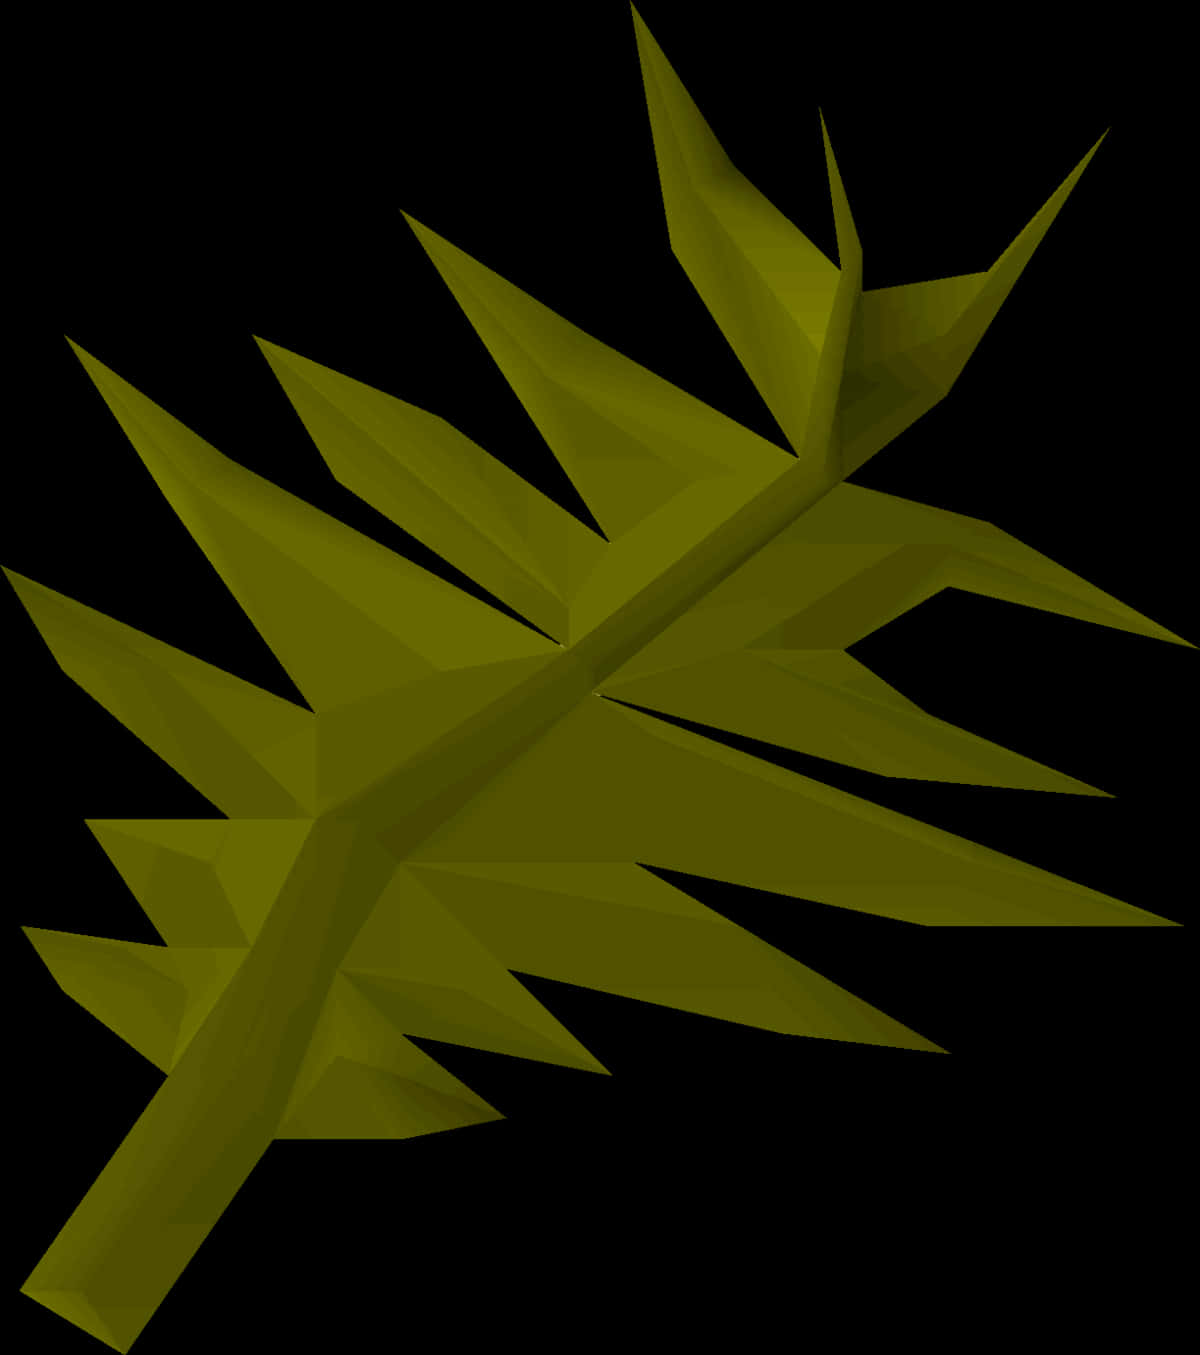 Abstract Cannabis Leaf Graphic PNG